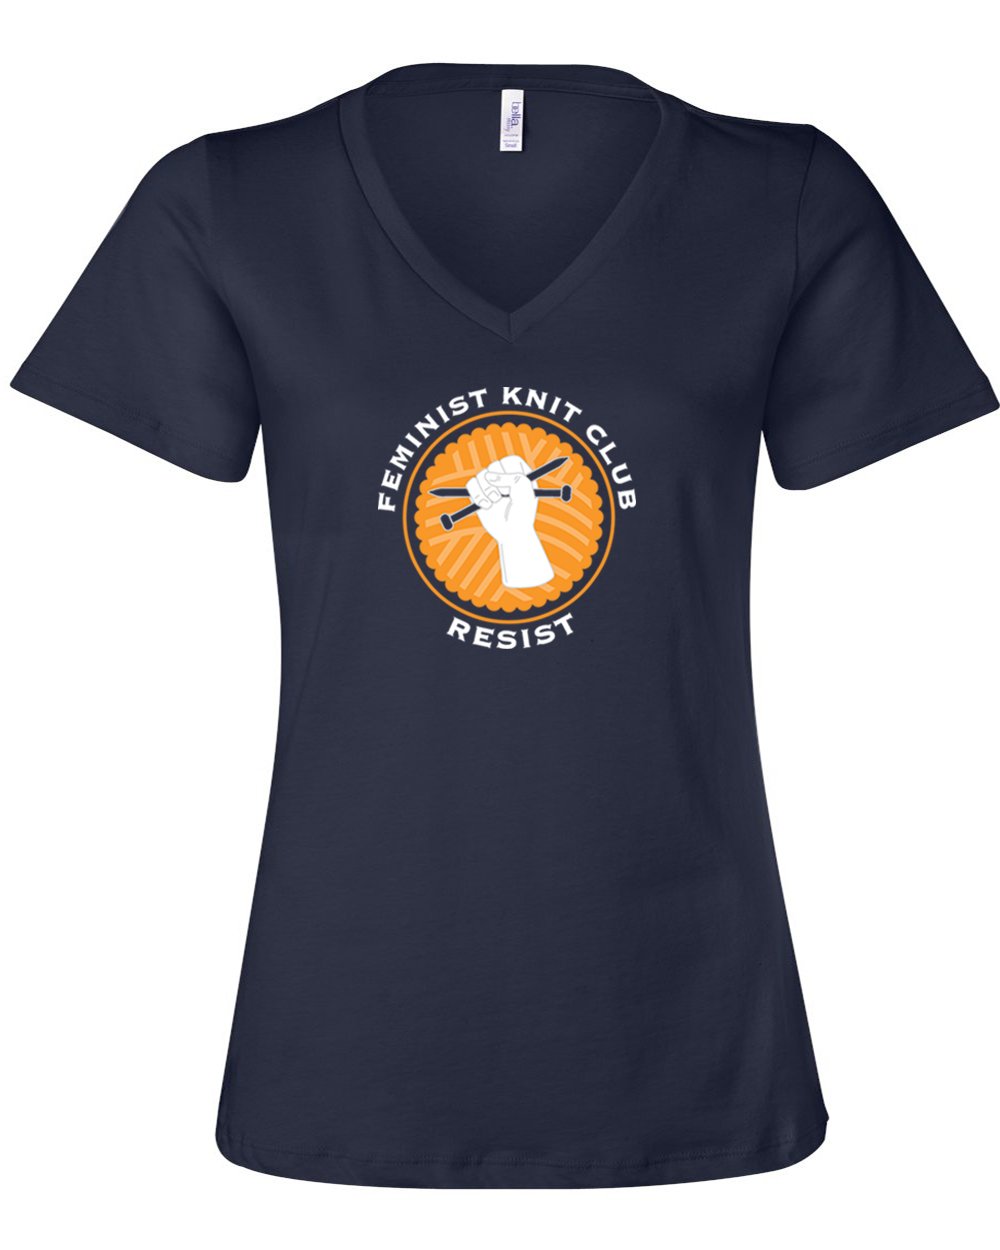 Image of Navy V-Neck Feminist Knit Club - Relaxed Women's Tee